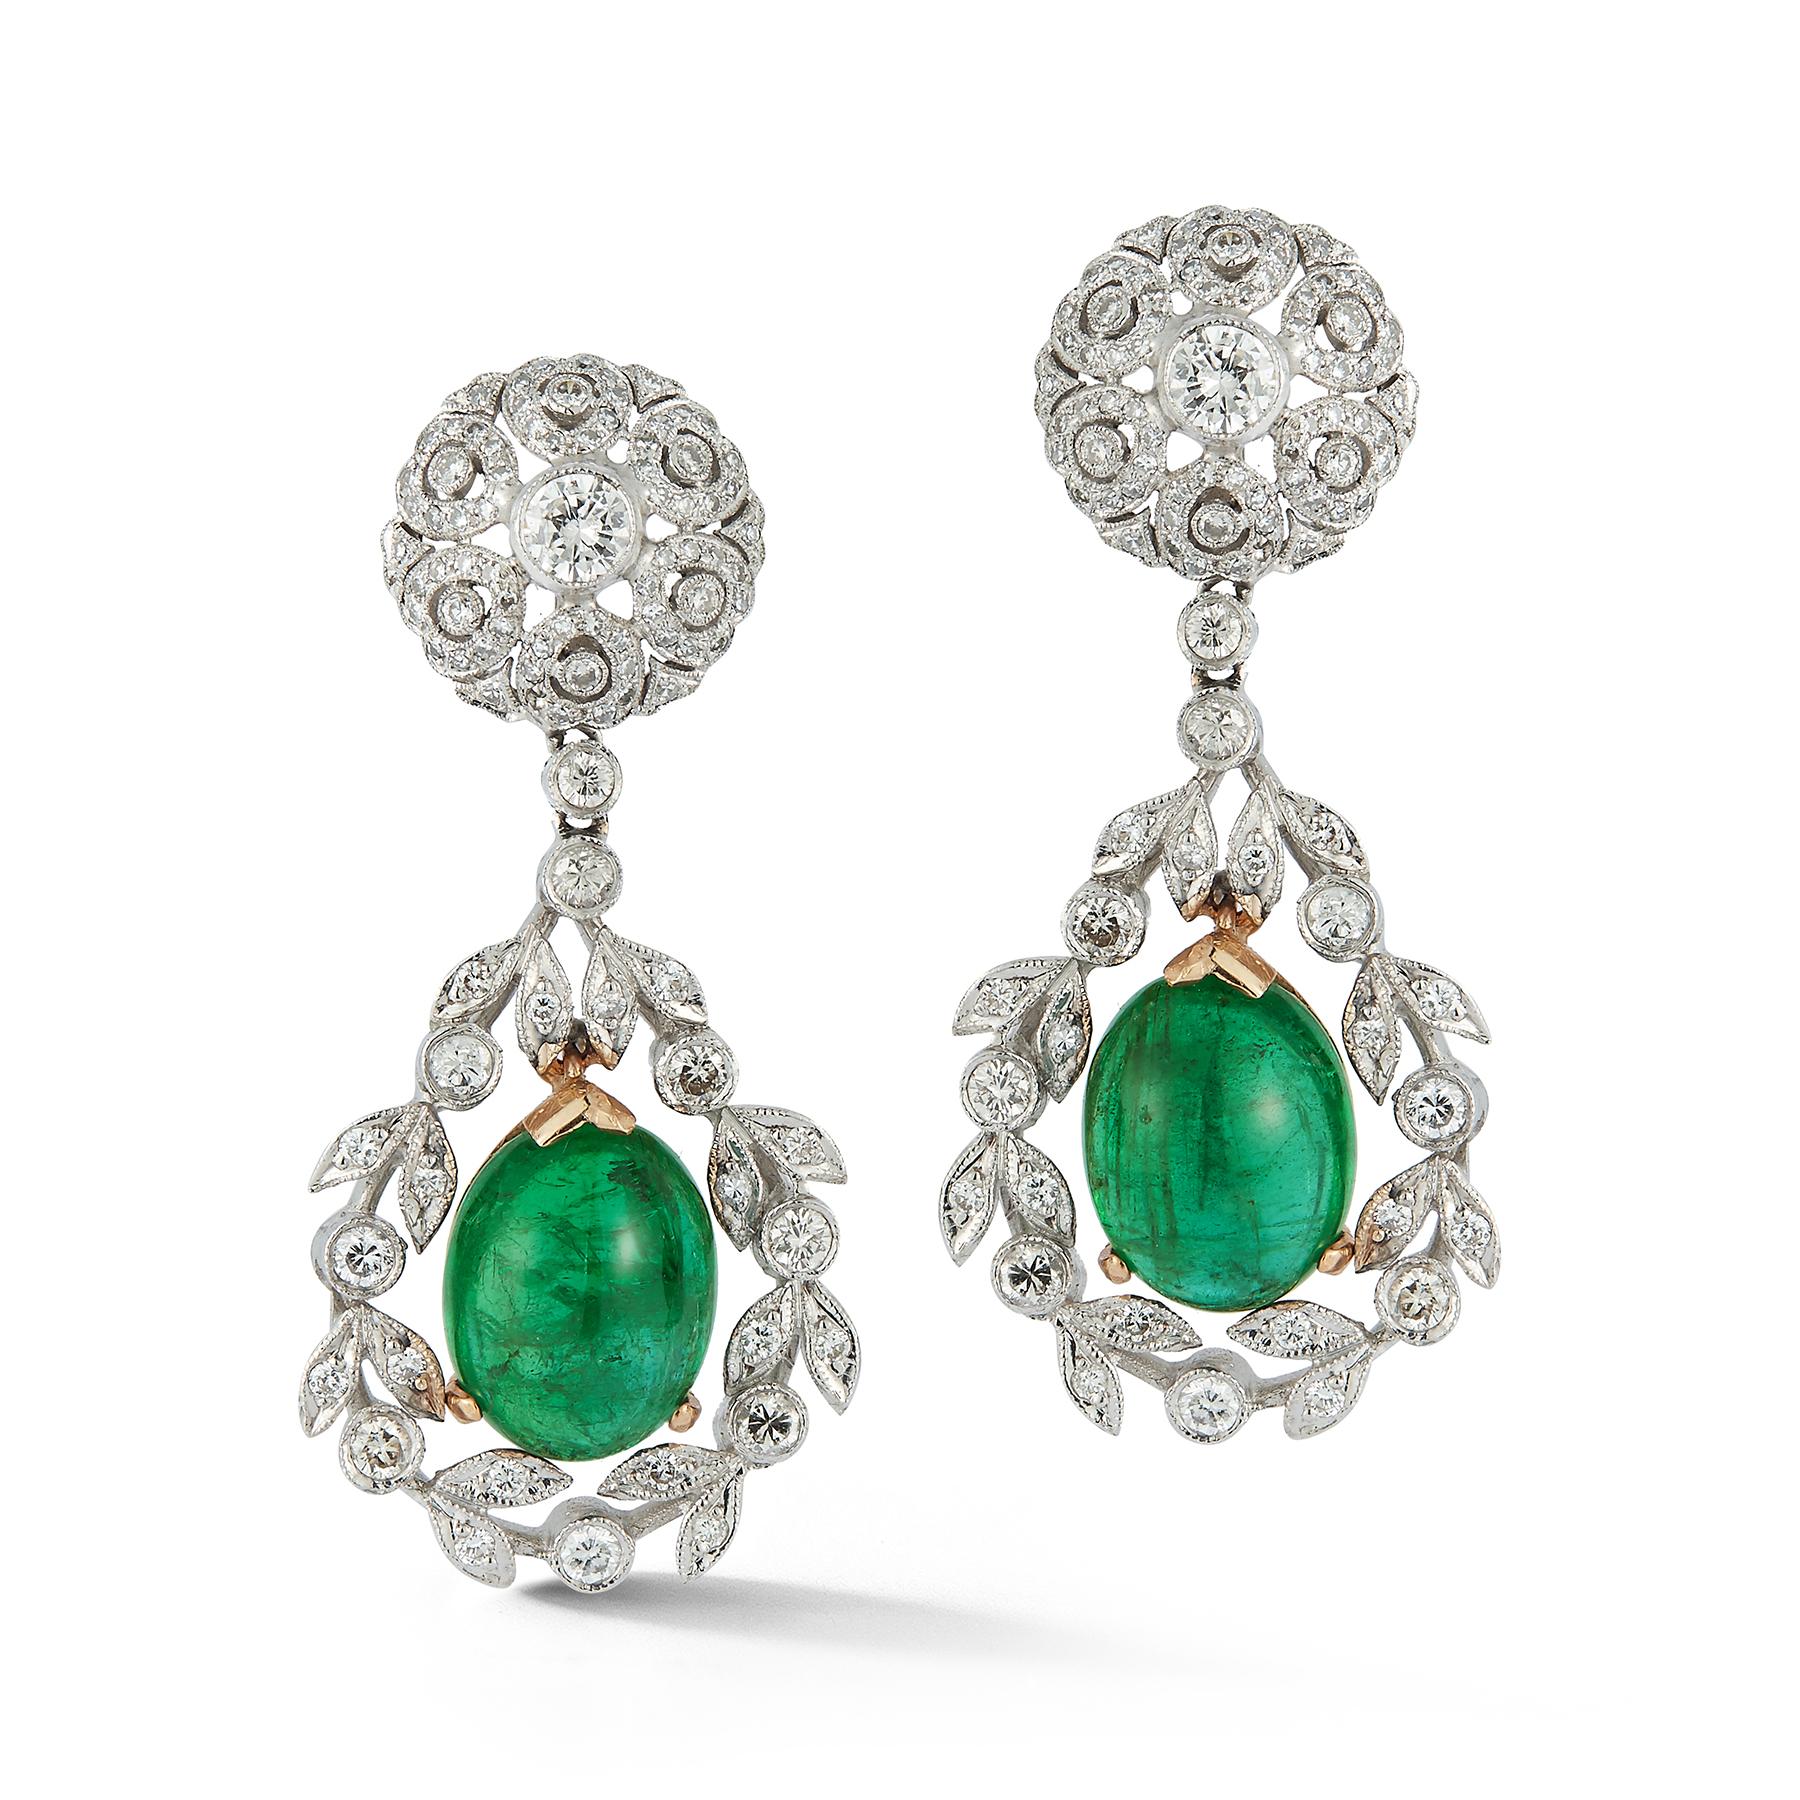 Cabochon Emerald and Diamond Earrings

2 cabochon emeralds weighing approximately 9.65 carats
130 round diamonds weighing approximately 6.53 carats

Length: 1.5